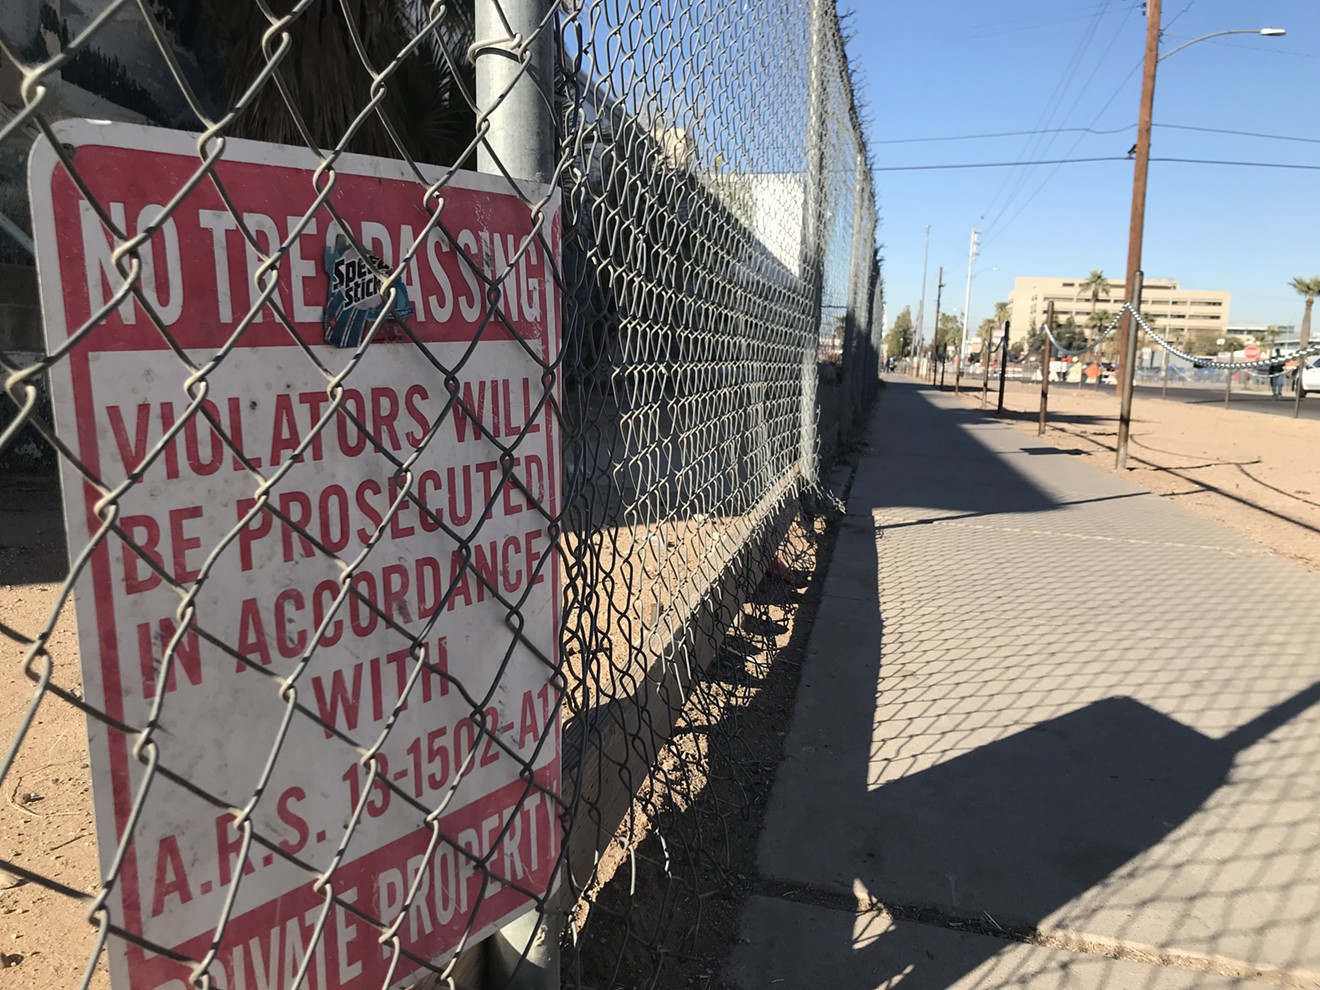 A neighborhood group is applying to have sidewalks near Arizona's largest emergency homeless shelter, like this one, privatized.